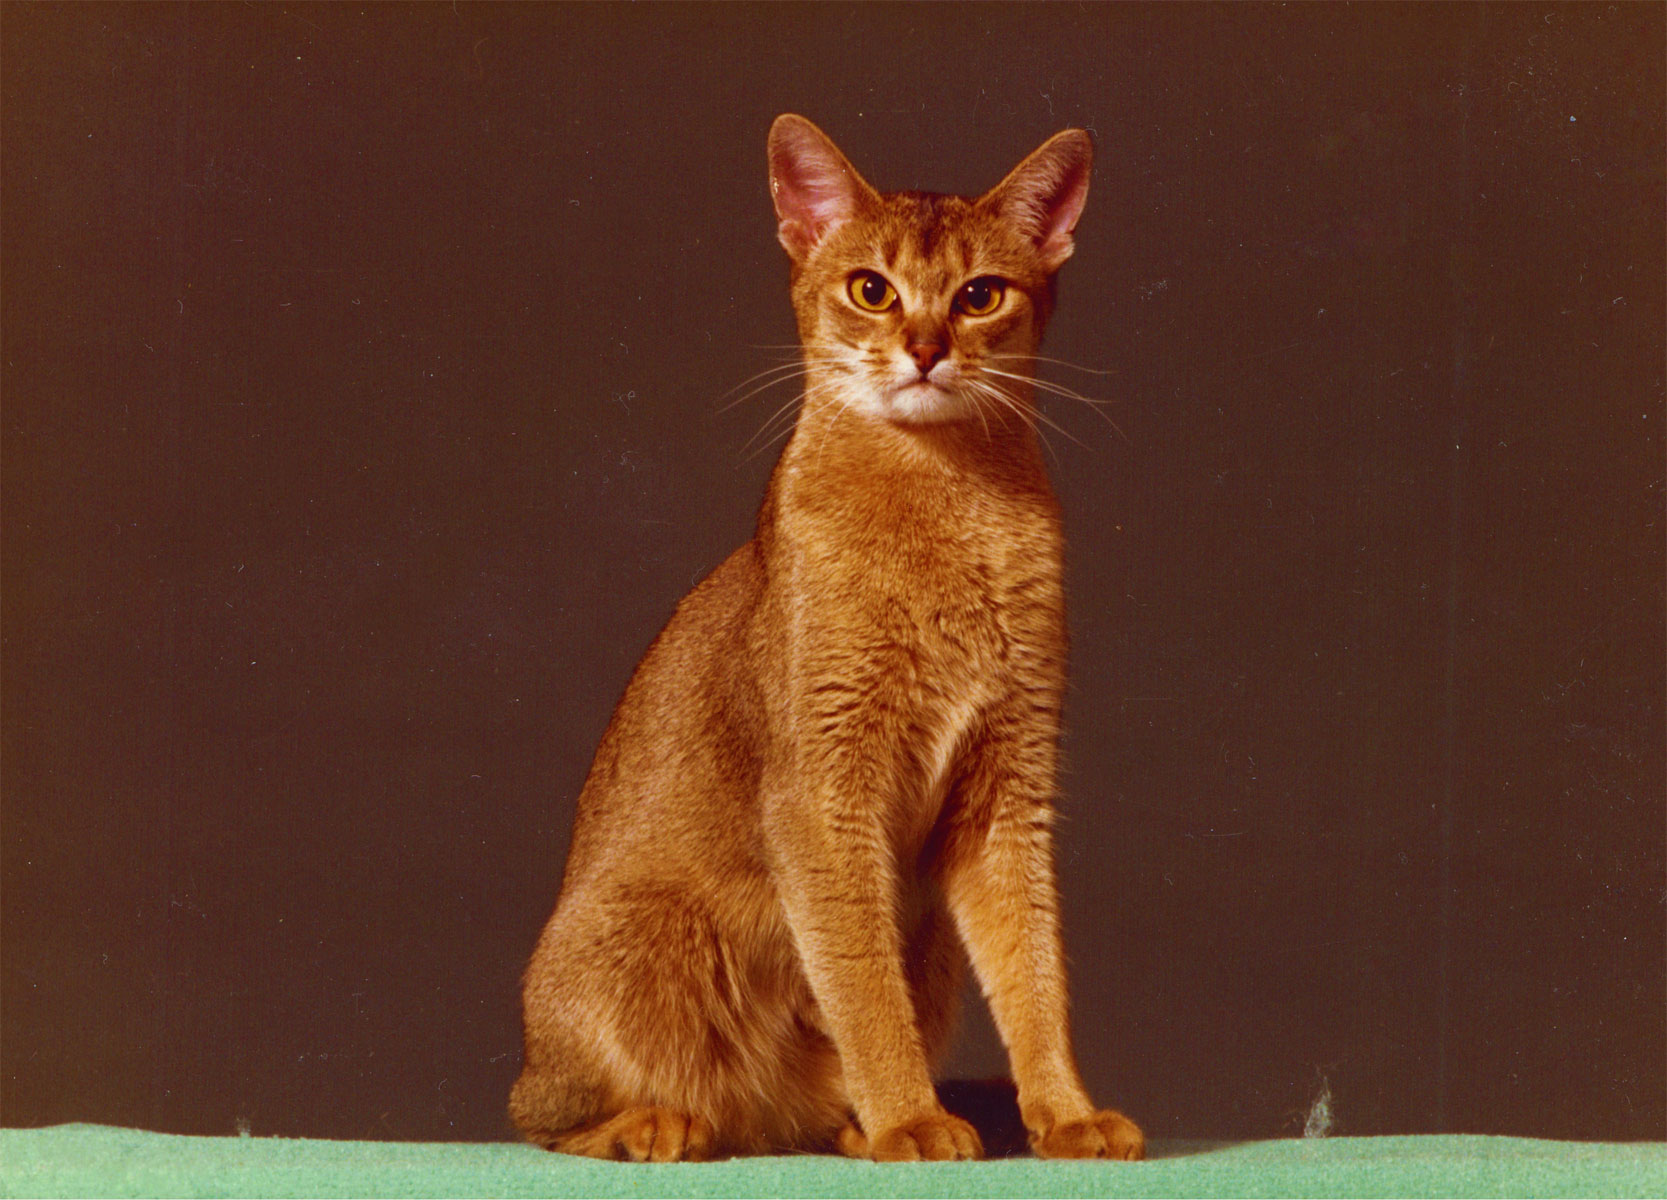 Eur.Gr.Int.Ch. Wodan's Nubiani; 23 ruddy; female (1981-1994) Famous Aby many Best in Shows and many famous Kittens 23 & 23 a